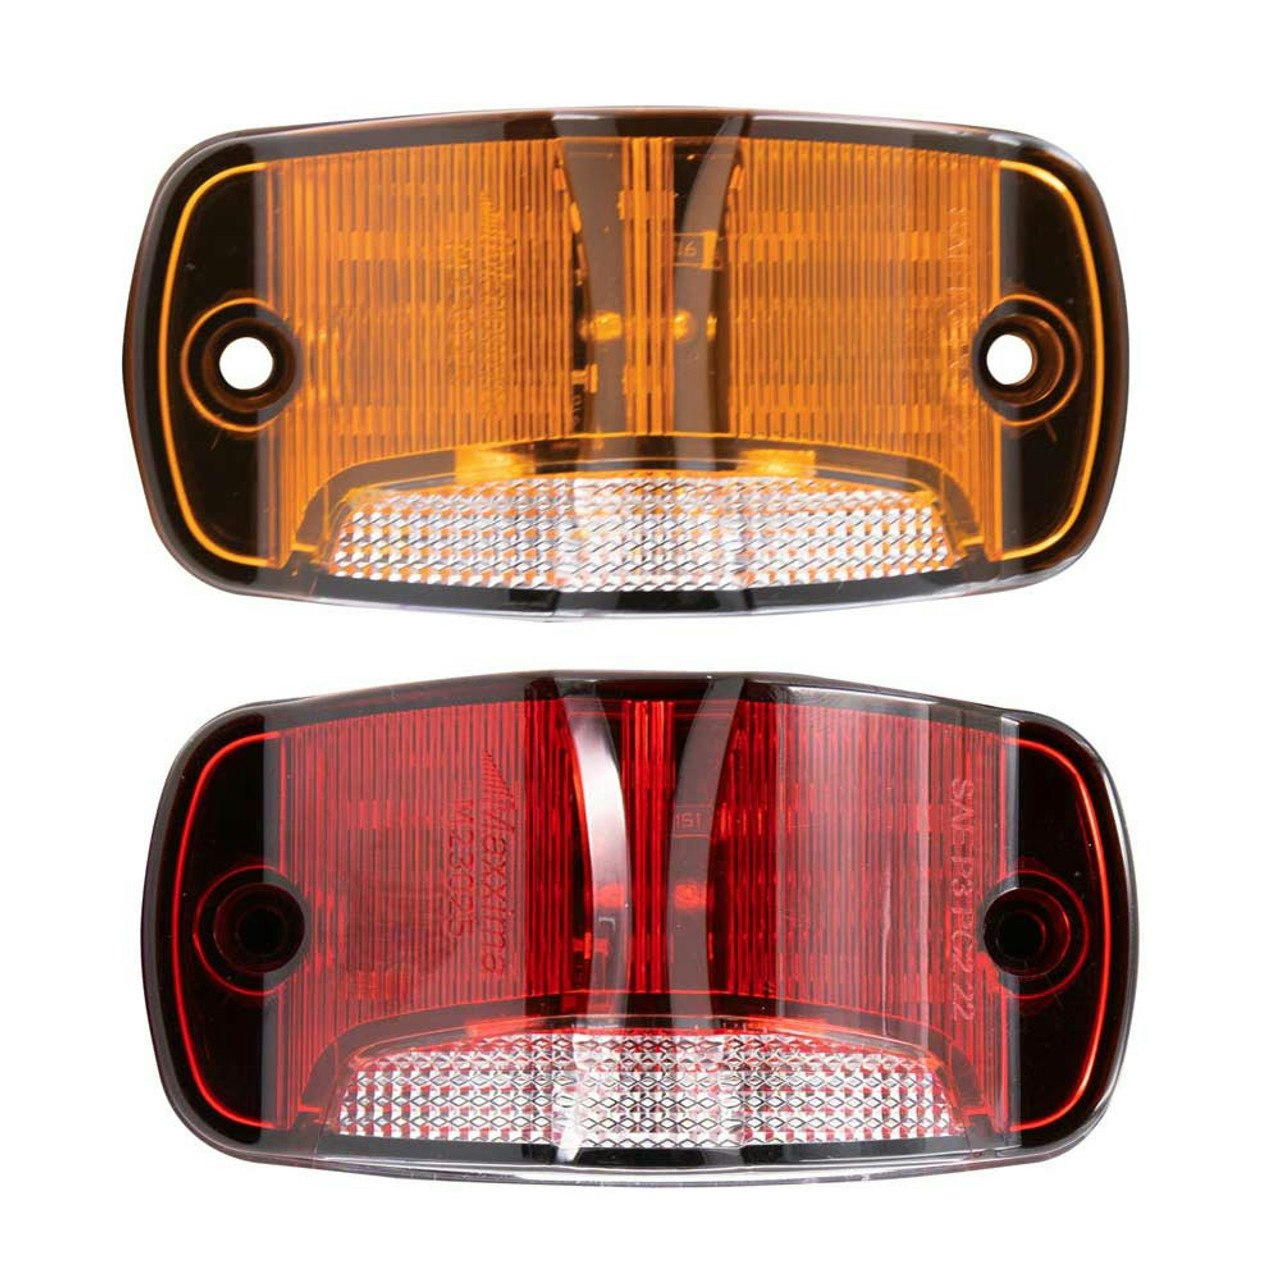 LED 4" Rectangular Clearance Marker Light With White Ground Light By Maxxima - Truck Parts